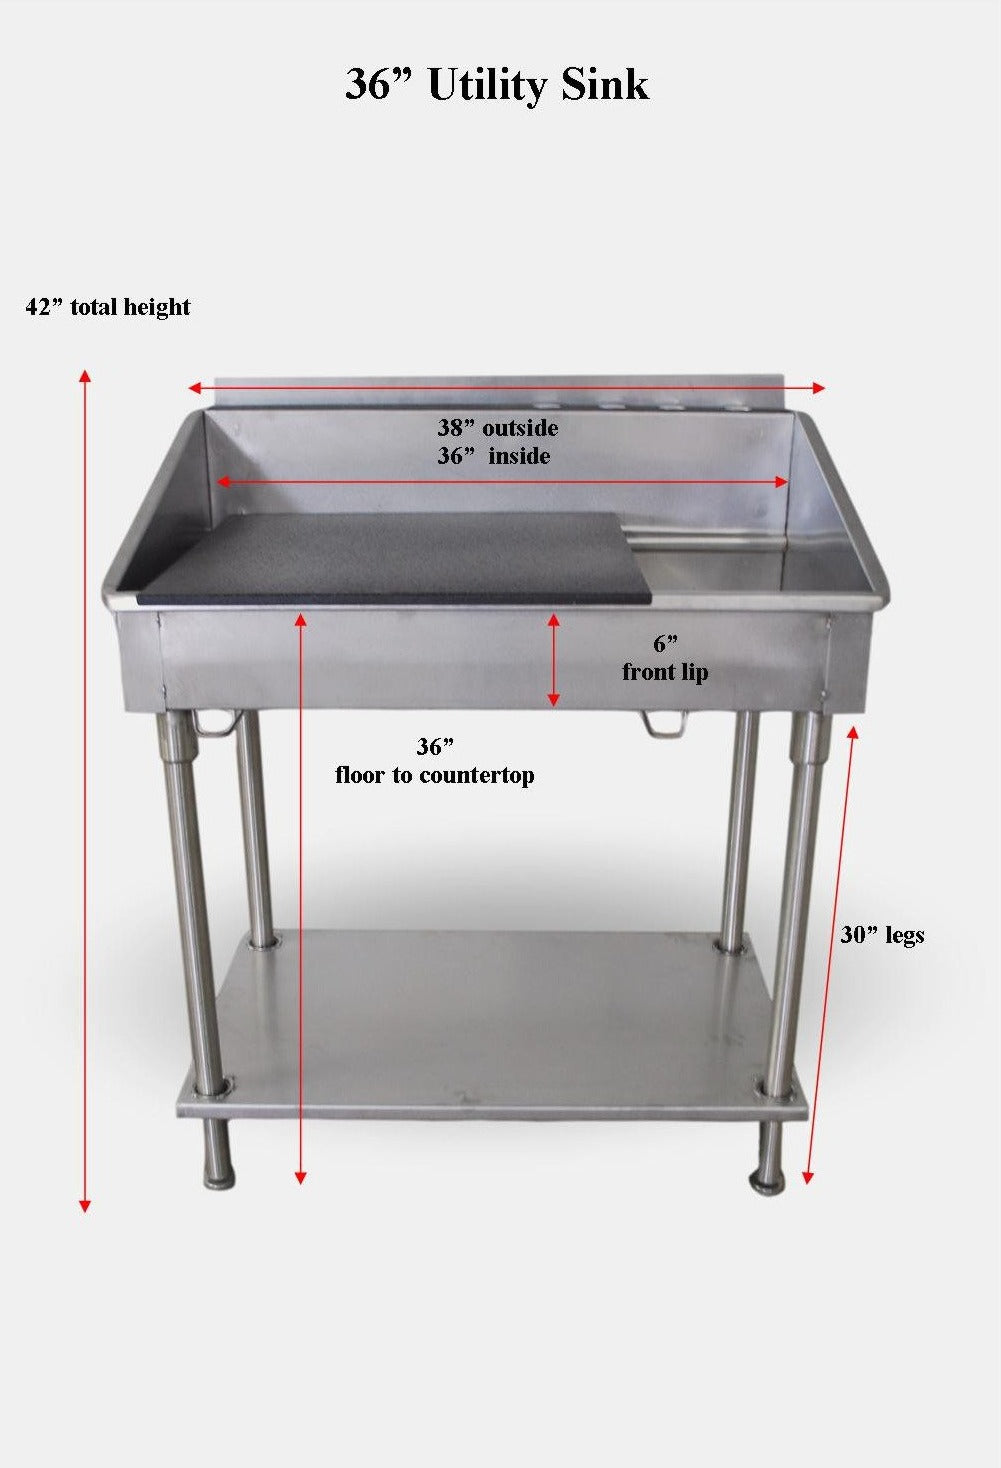 Groomer's Best Stainless Steel Shallow Utility Sink for Grooming and Veterinary Professionals